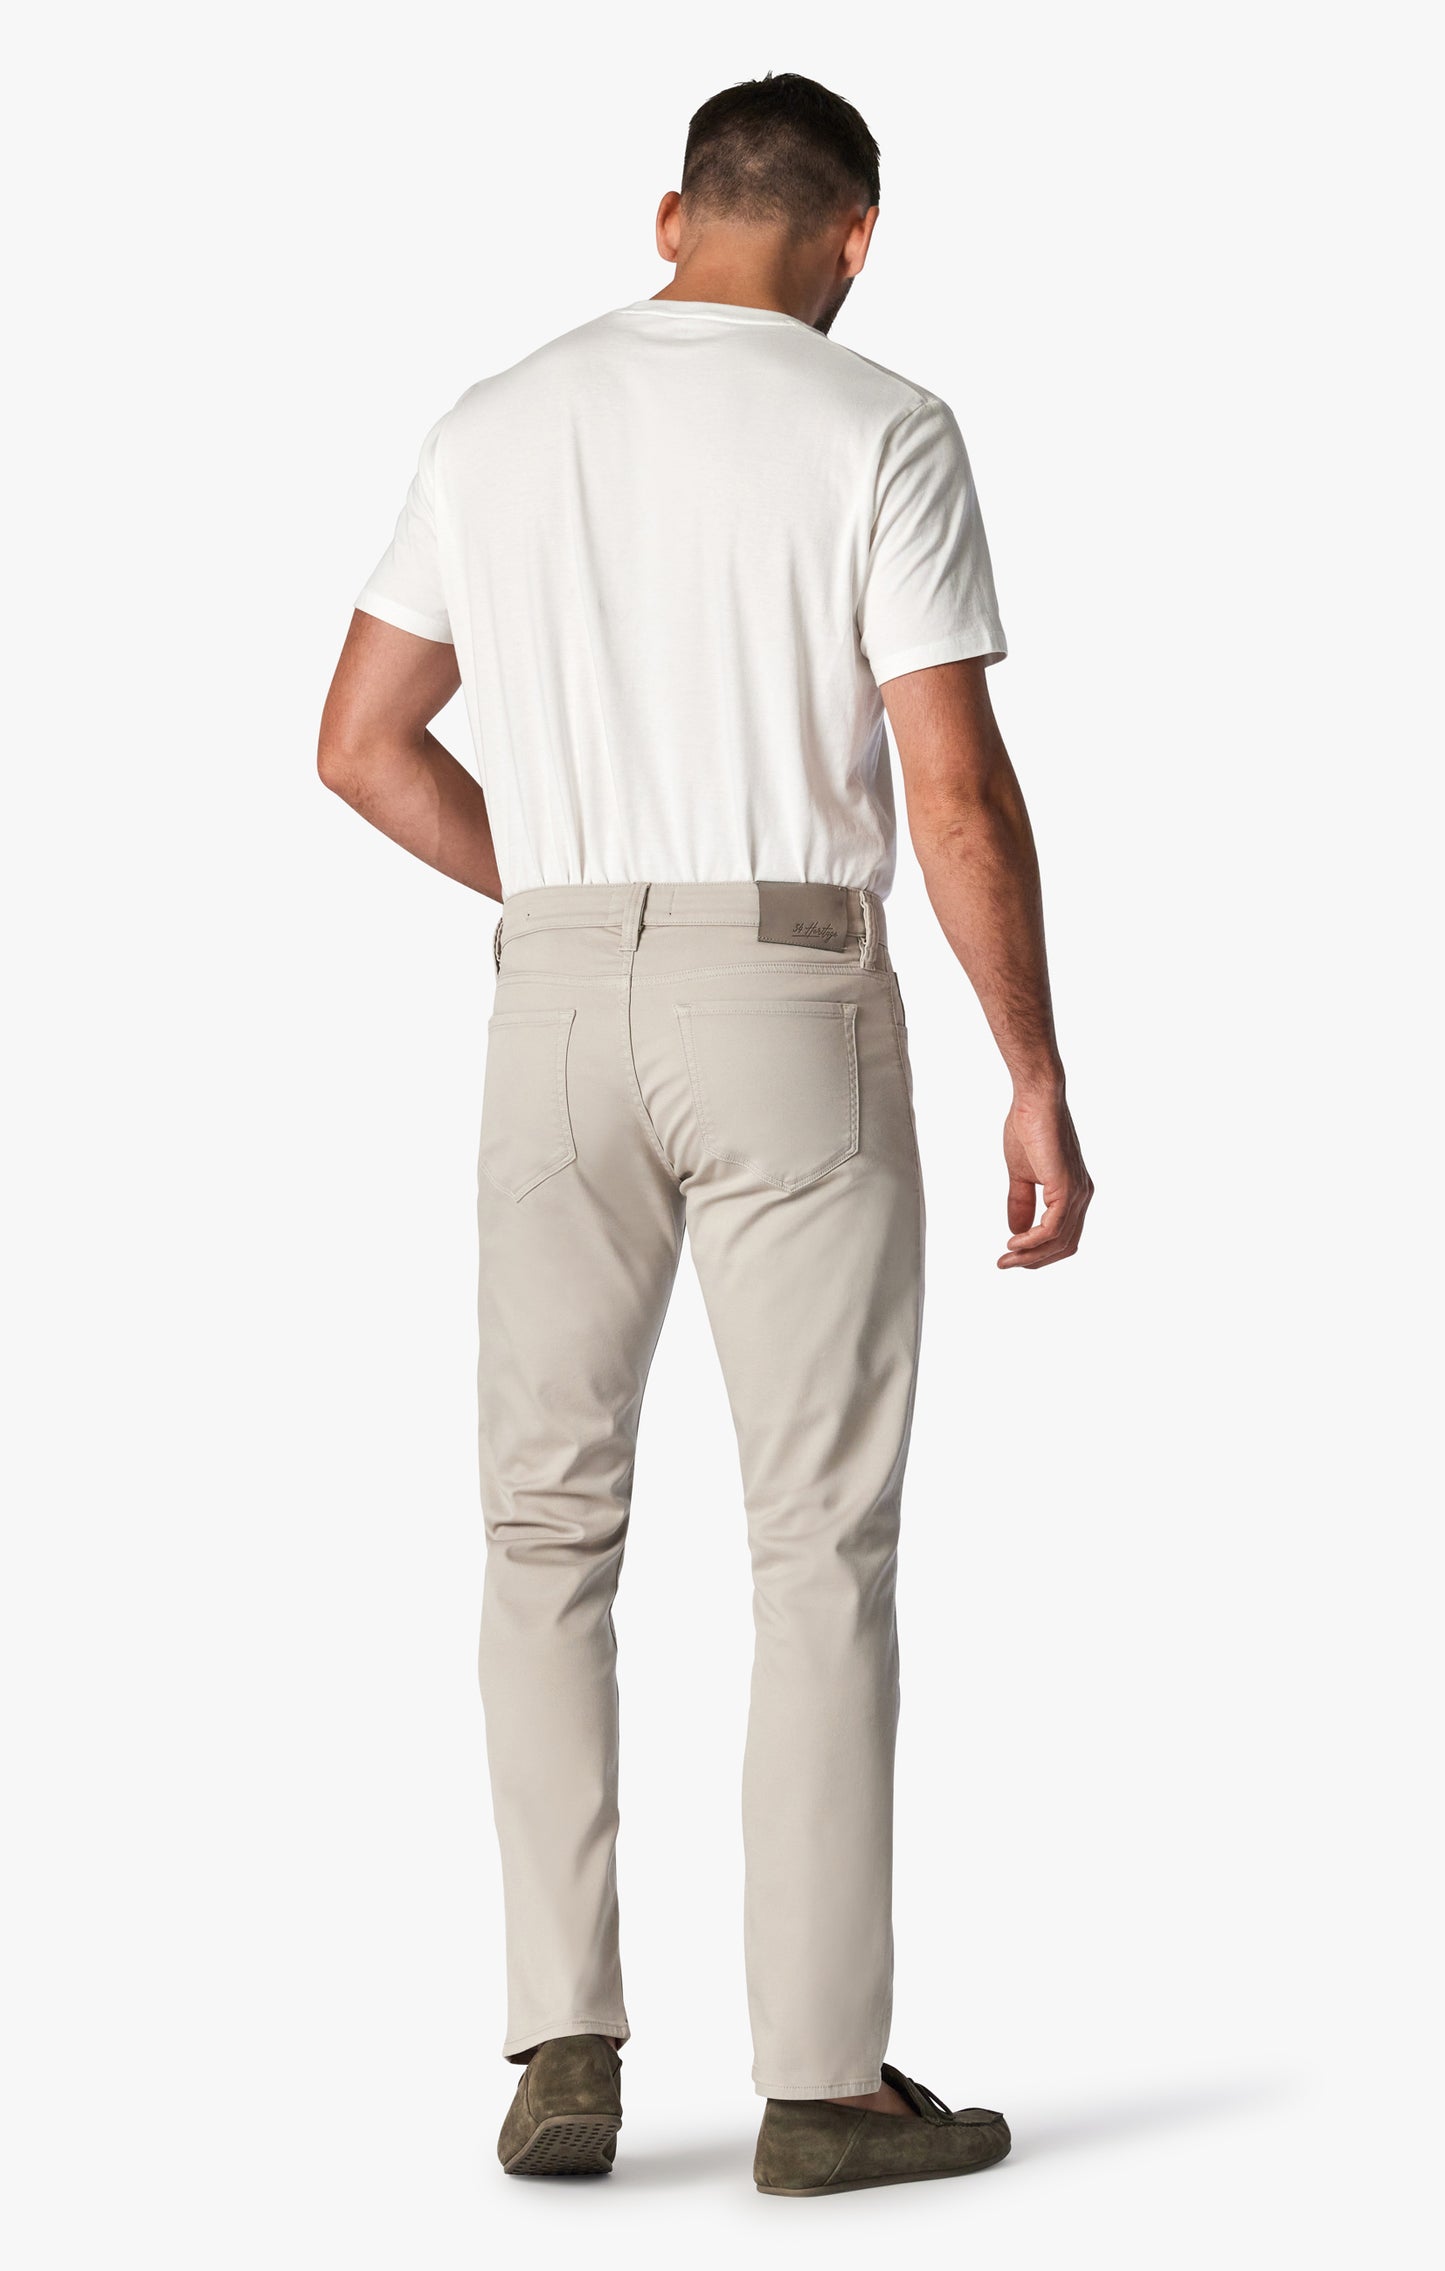 Courage Summer Coolmax Pant in Oyster